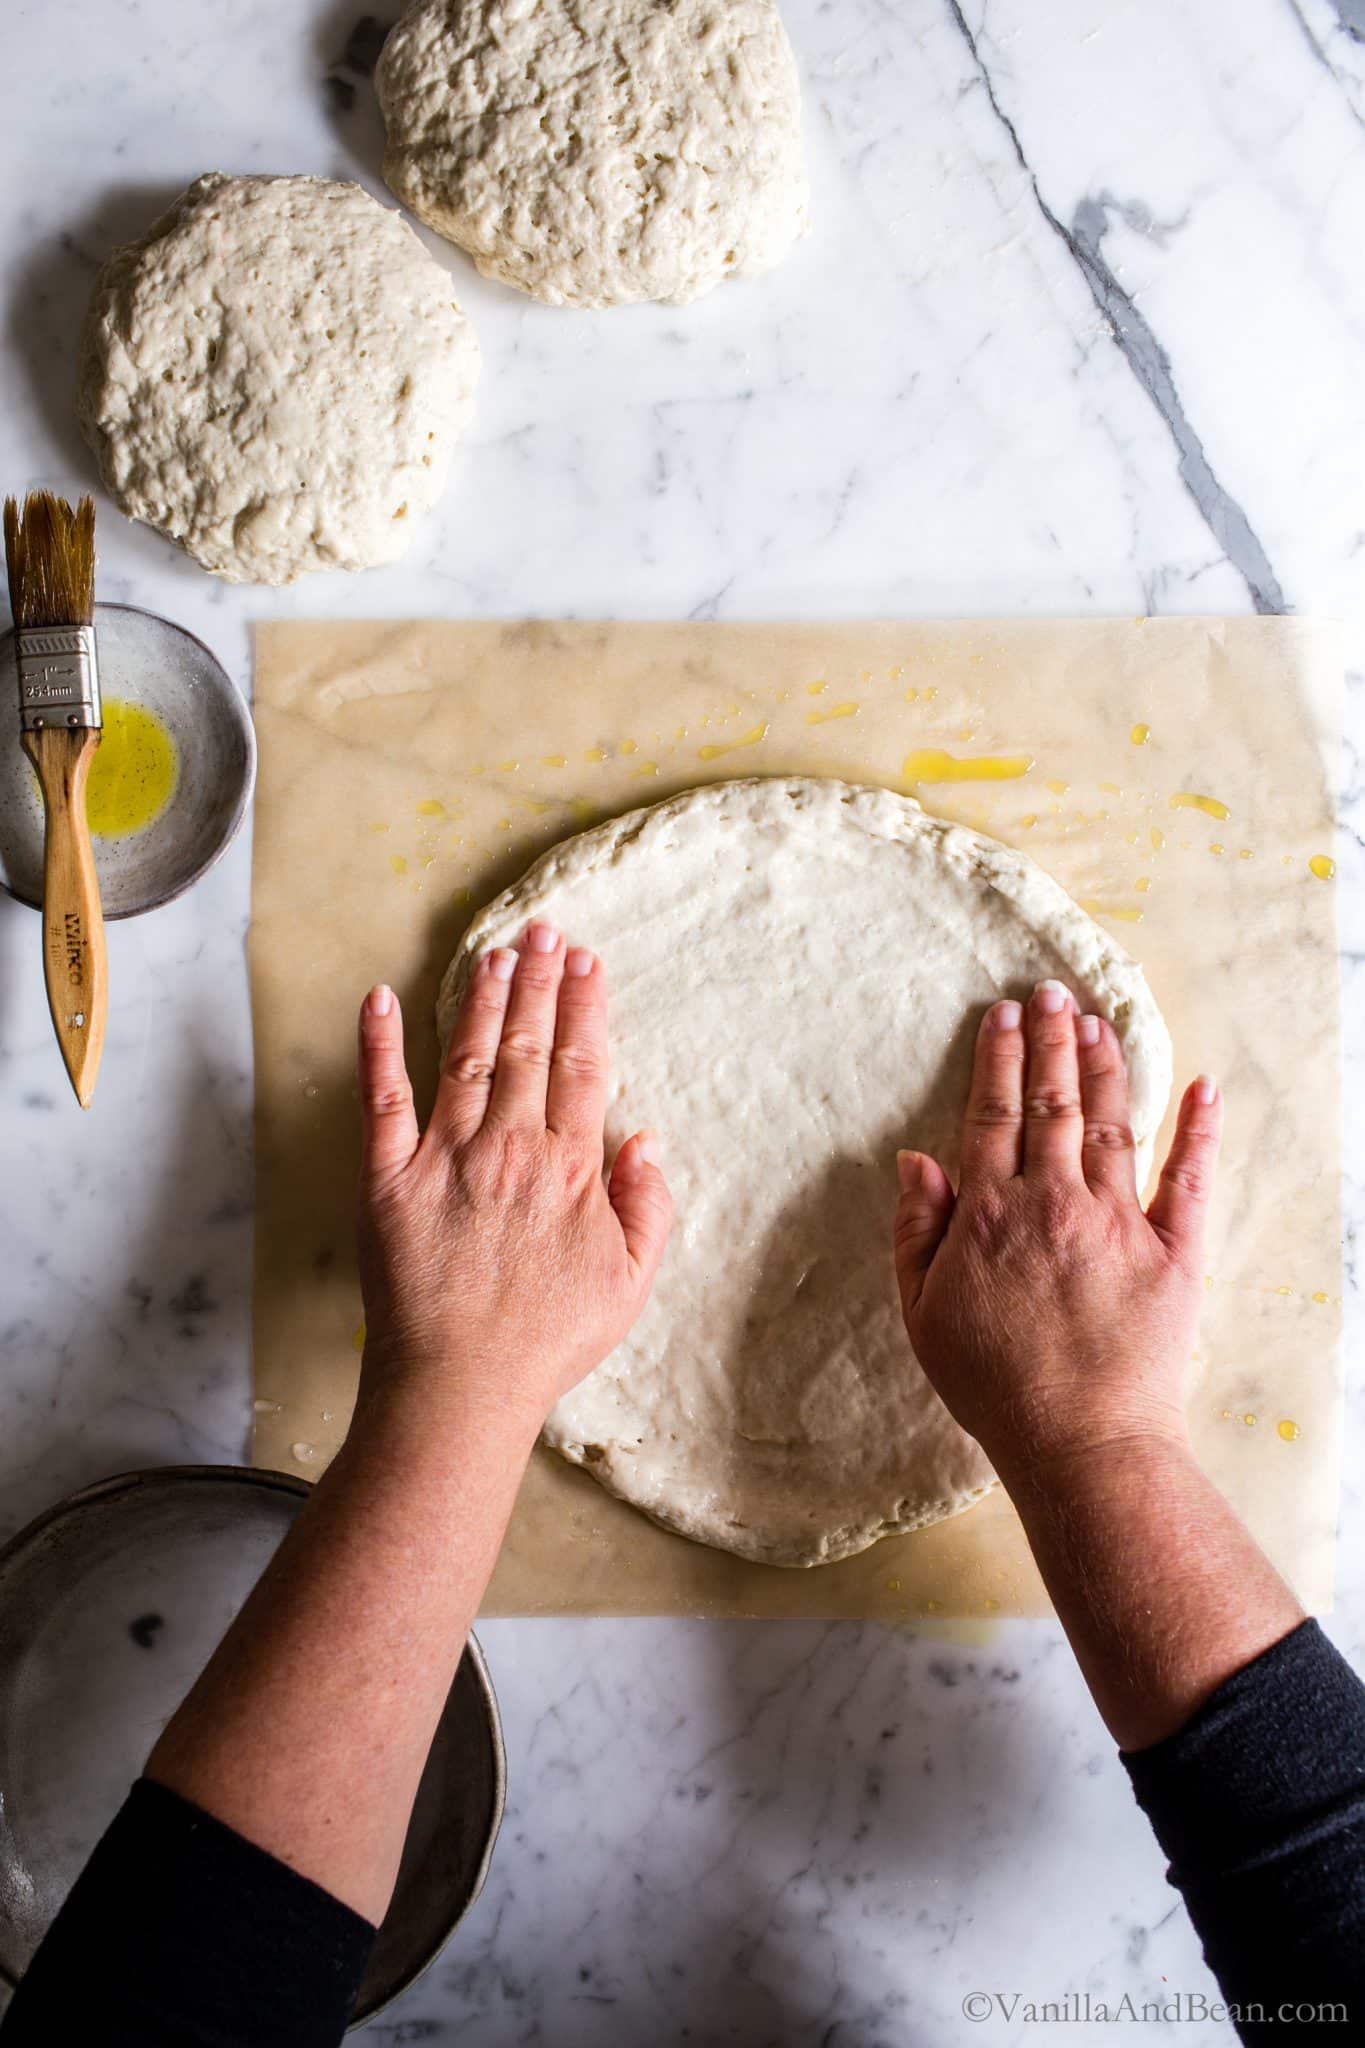 Working on the edges of the soon-to-be crust with two hands